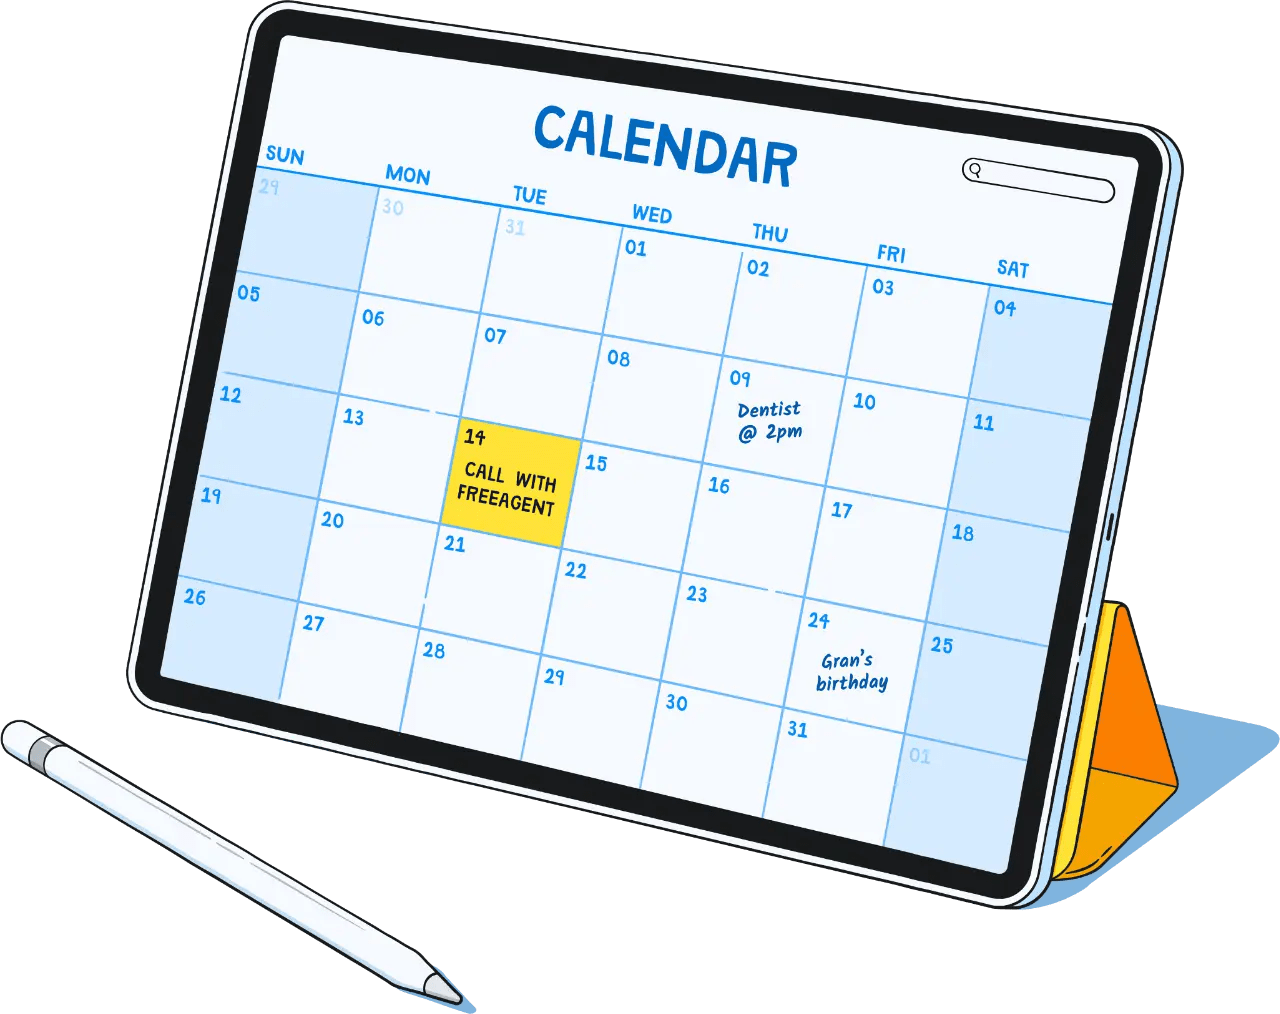 Illustration of an iPad displaying a calendar. The 21st is highlighted in yellow with 'Call with FreeAgent' written within.